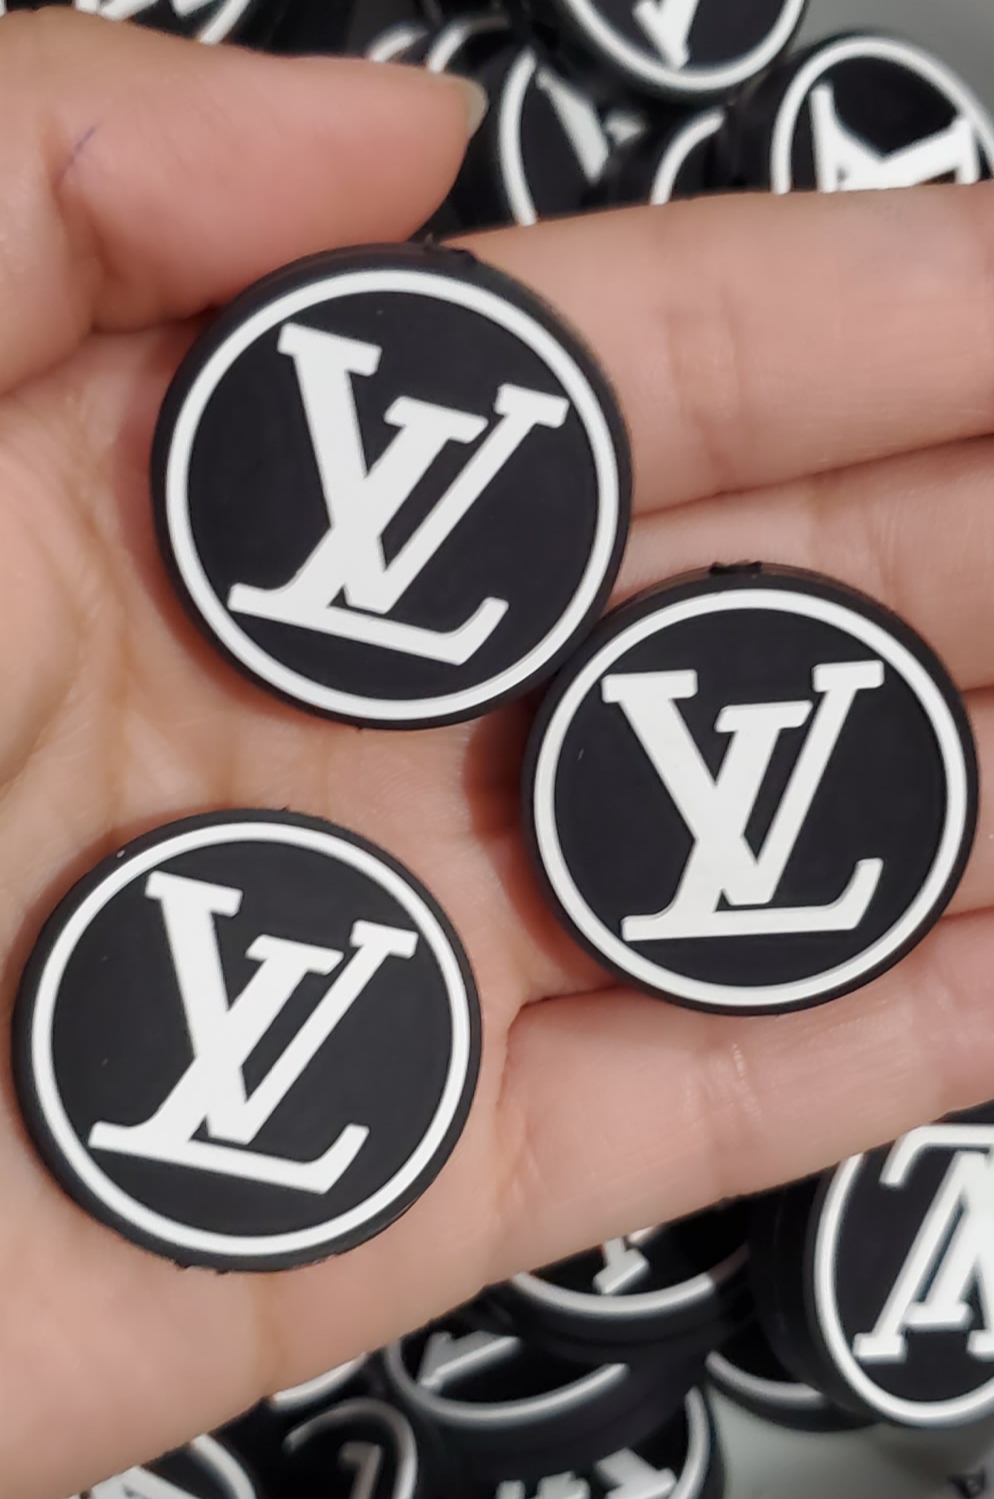 Lv silicone beads